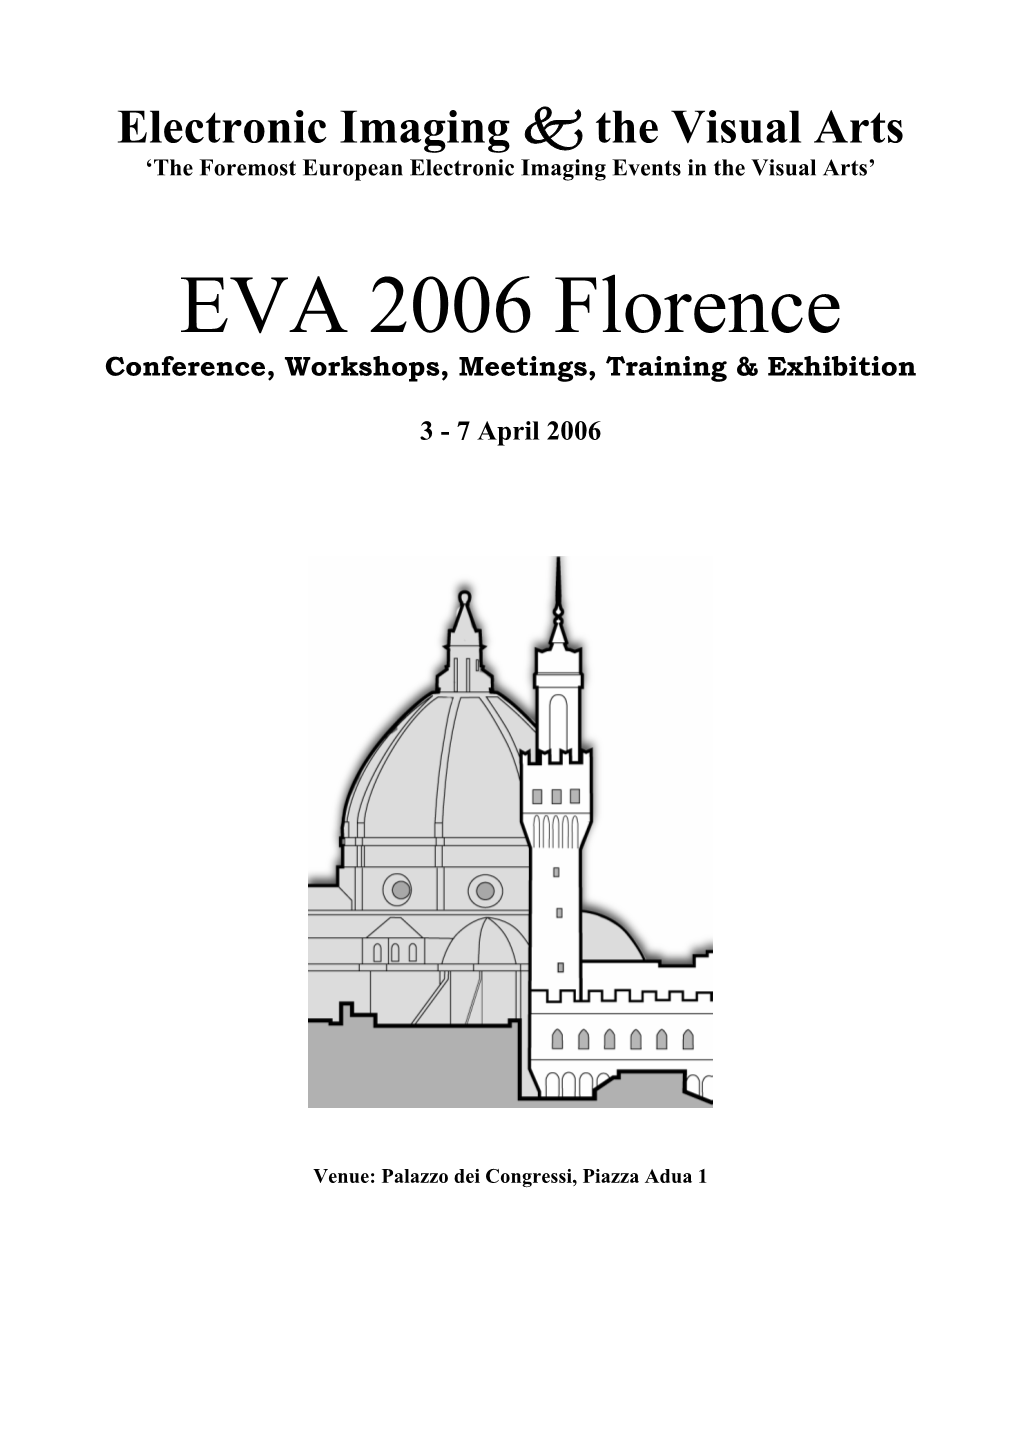 EVA 2006 Florence Conference, Workshops, Meetings, Training & Exhibition